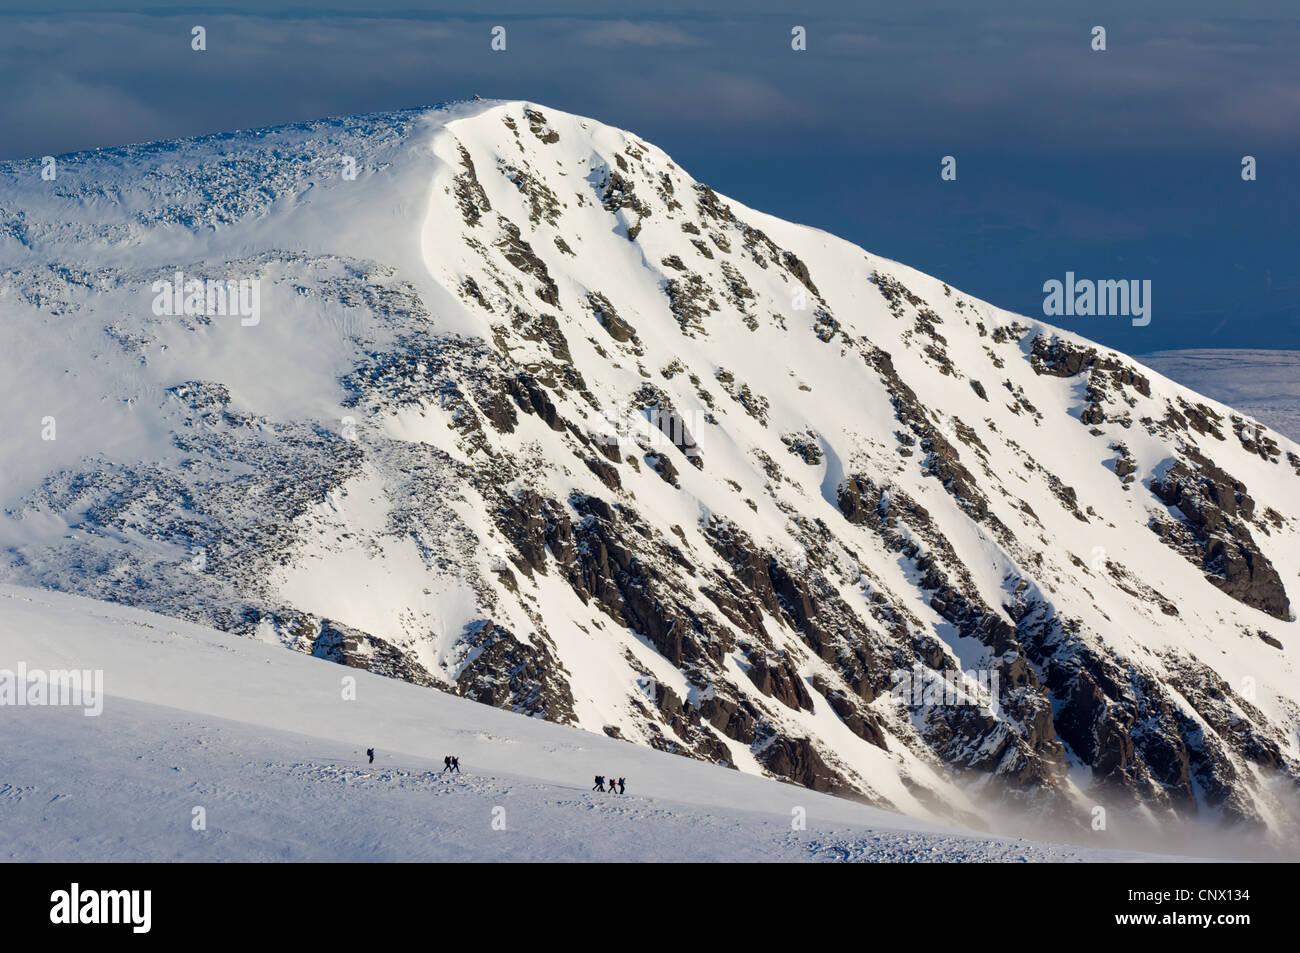 Group of hillwalkers crossing the Cairngorm plateau in winter Stock Photo